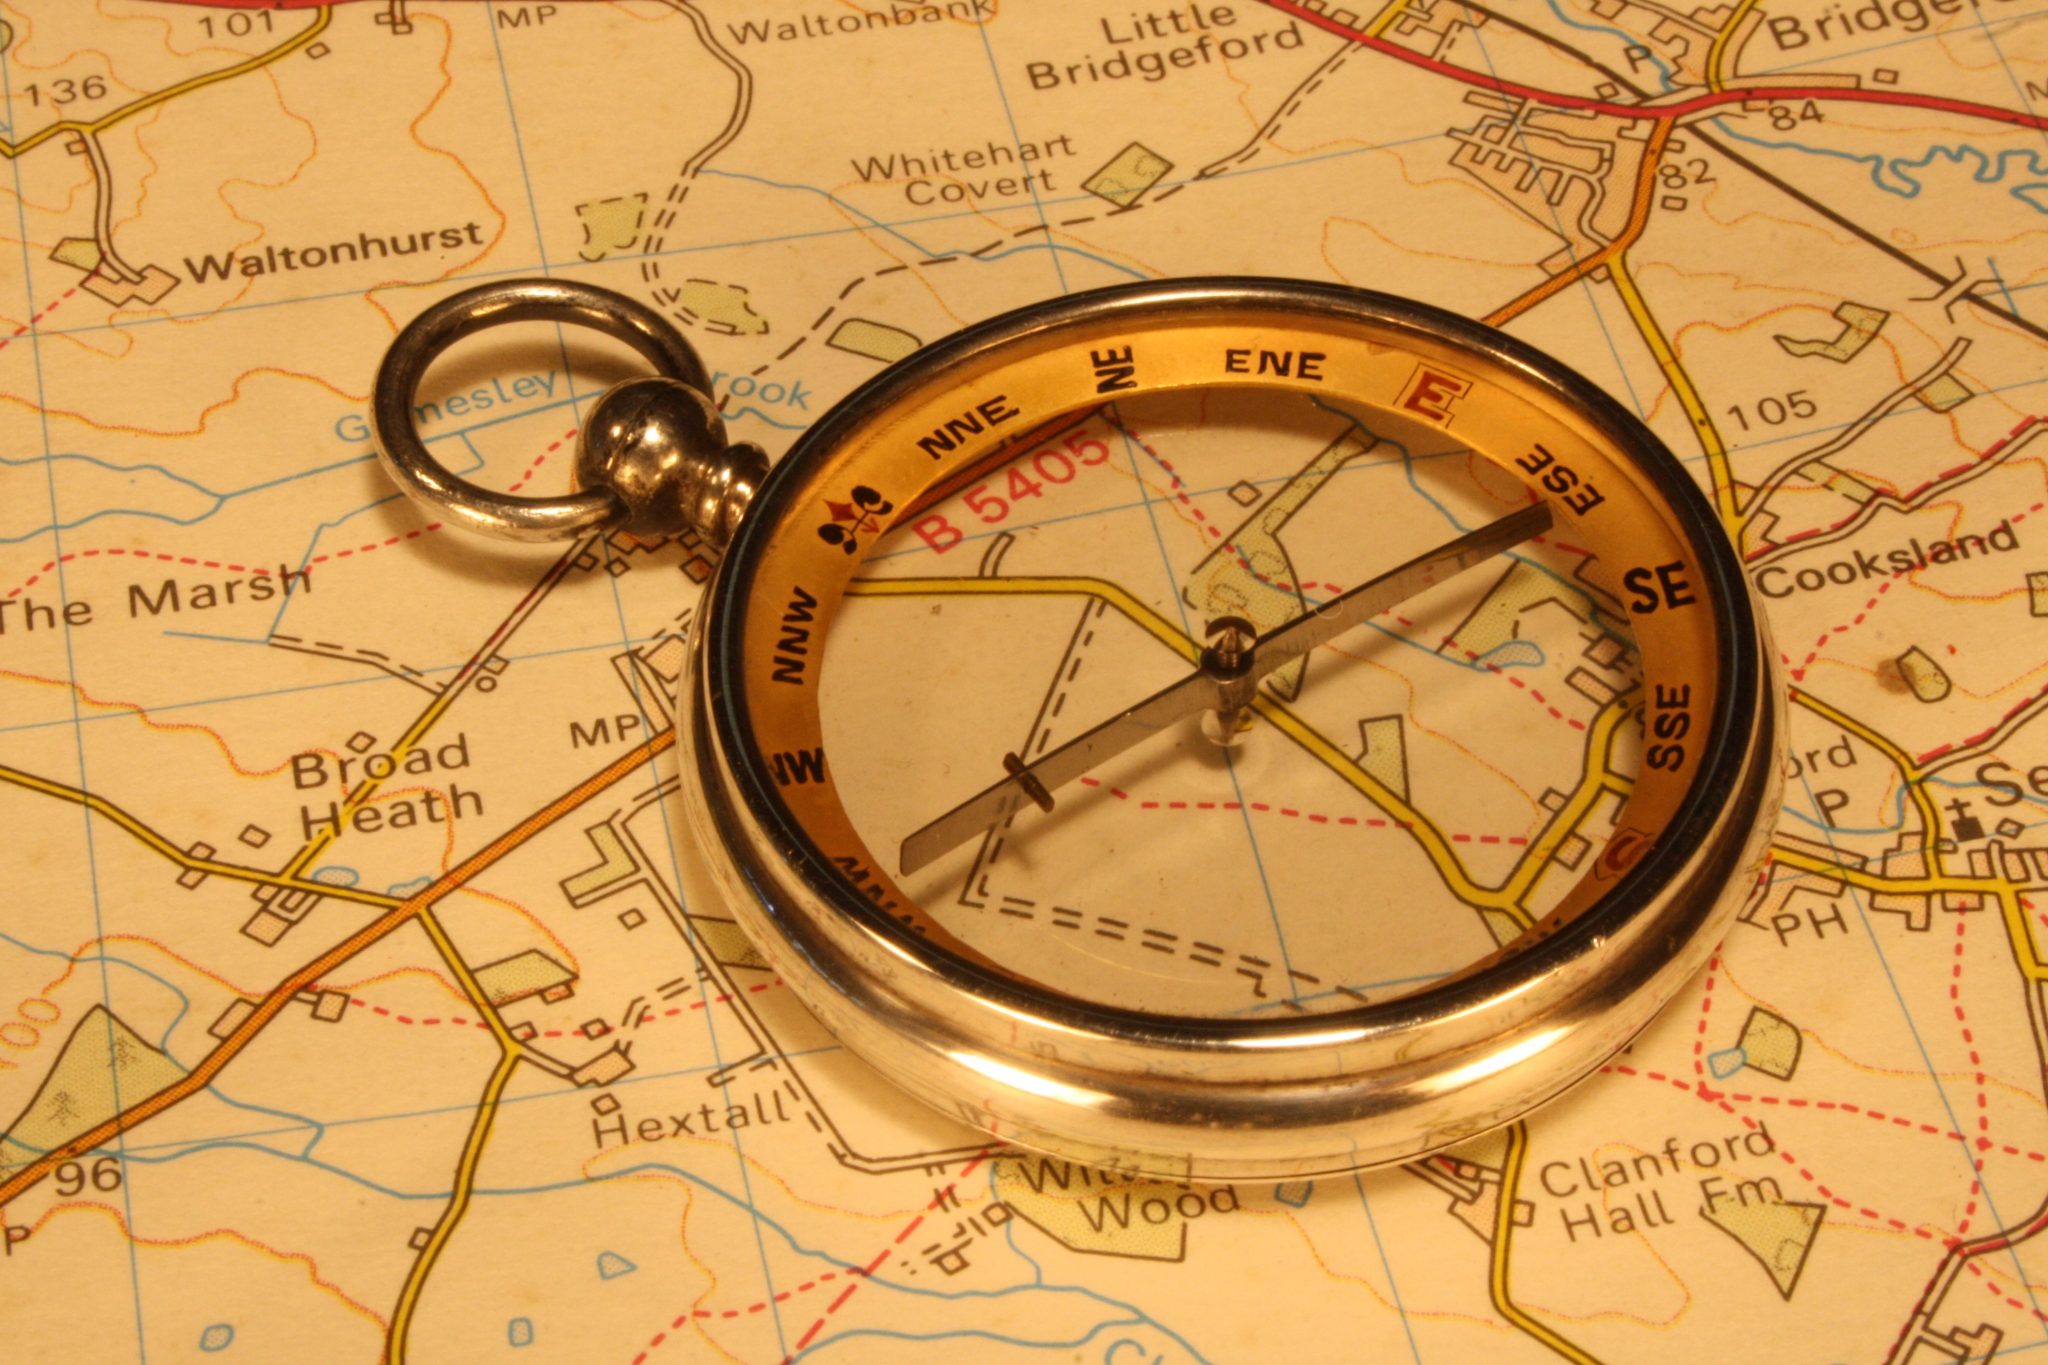 Image of Transparent Compass by Barker – The Cyclist’s Compass